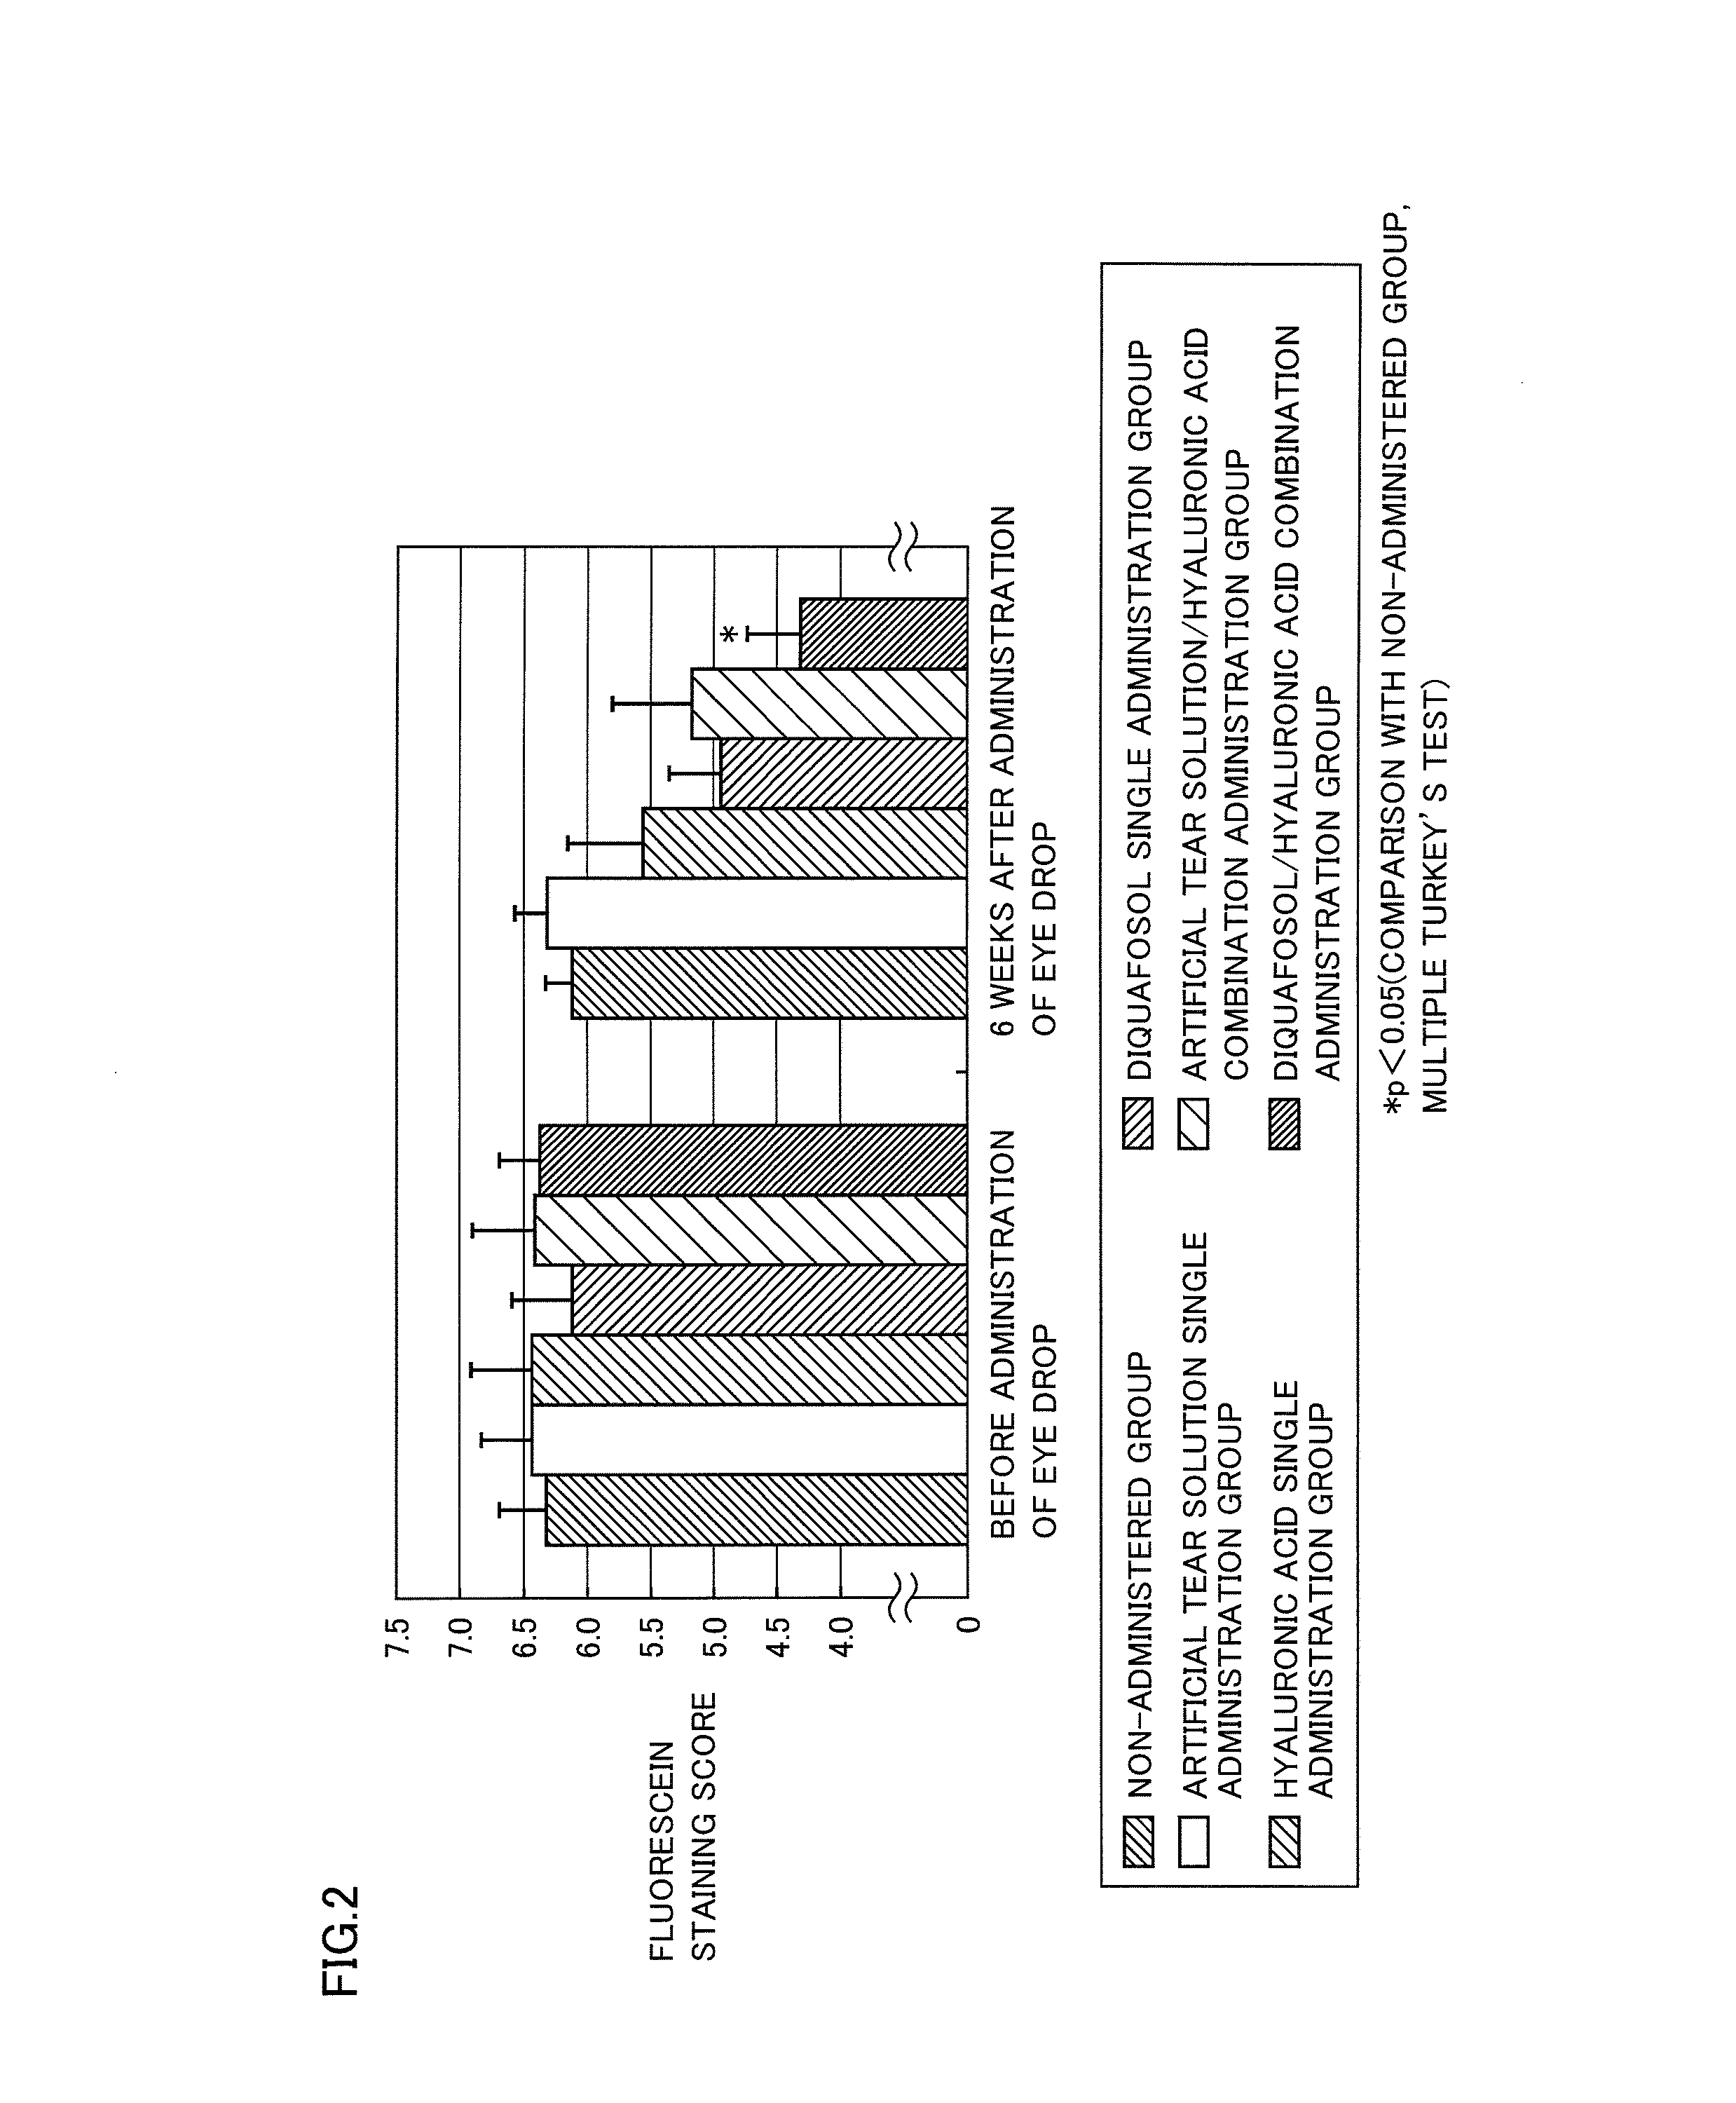 Agent for treatment of dry eye characterized by combining p2y2 receptor agonist and hyaluronic acid or salt thereof, method for treating dry eye, and use of the p2y2 receptor agonist and hyaluronic acid or salt thereof